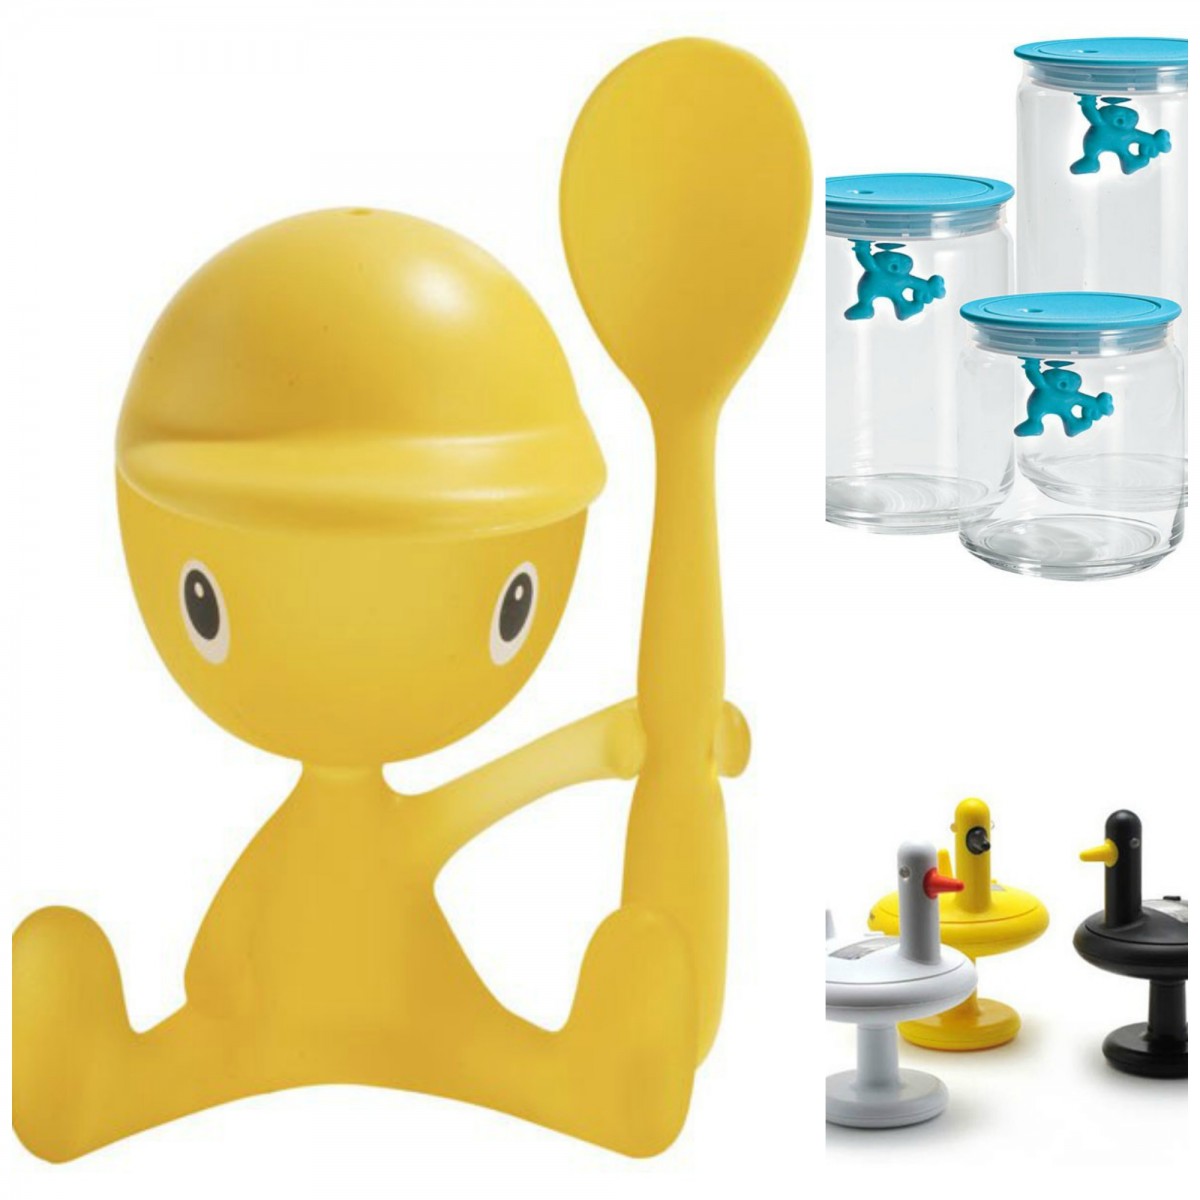 Alessi products from Red Candy